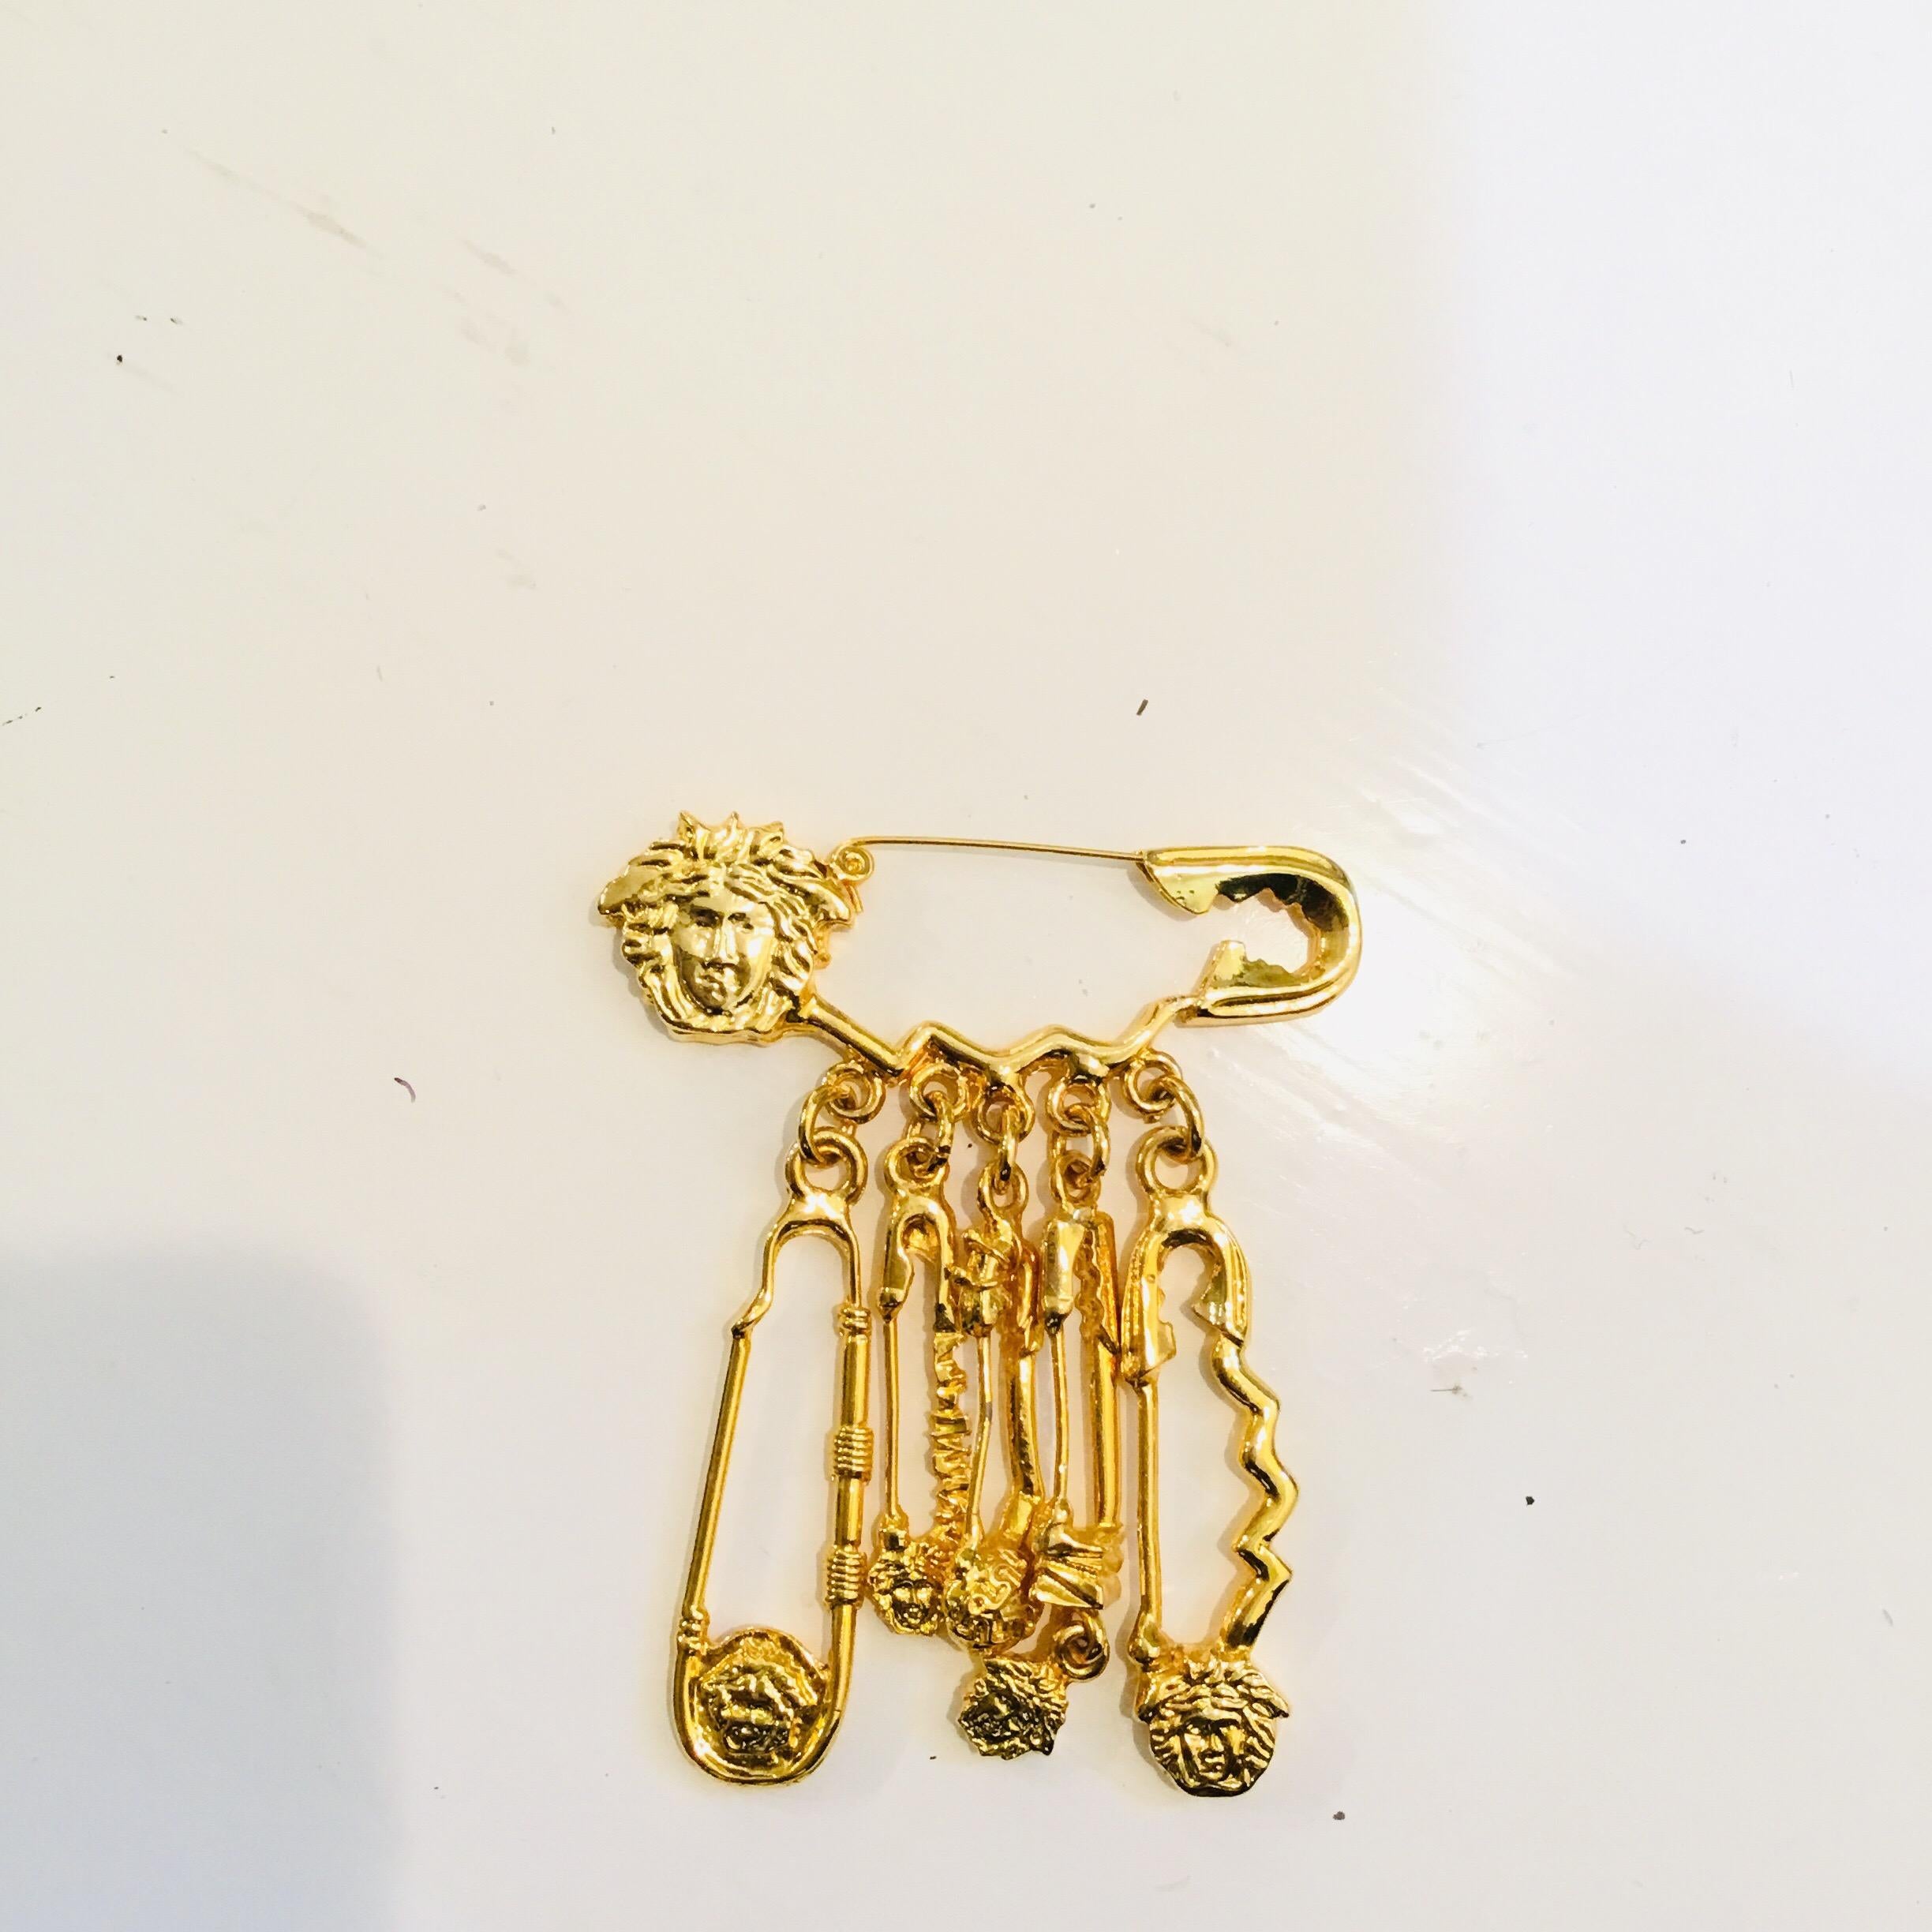 Versace gold brooch features a signature safety pin design with 5 dangling pins with Medusa head detailing. Brooch measures 2.5 inches across and 3.25 inches long. Brooch is unmarked, 100% authentic.